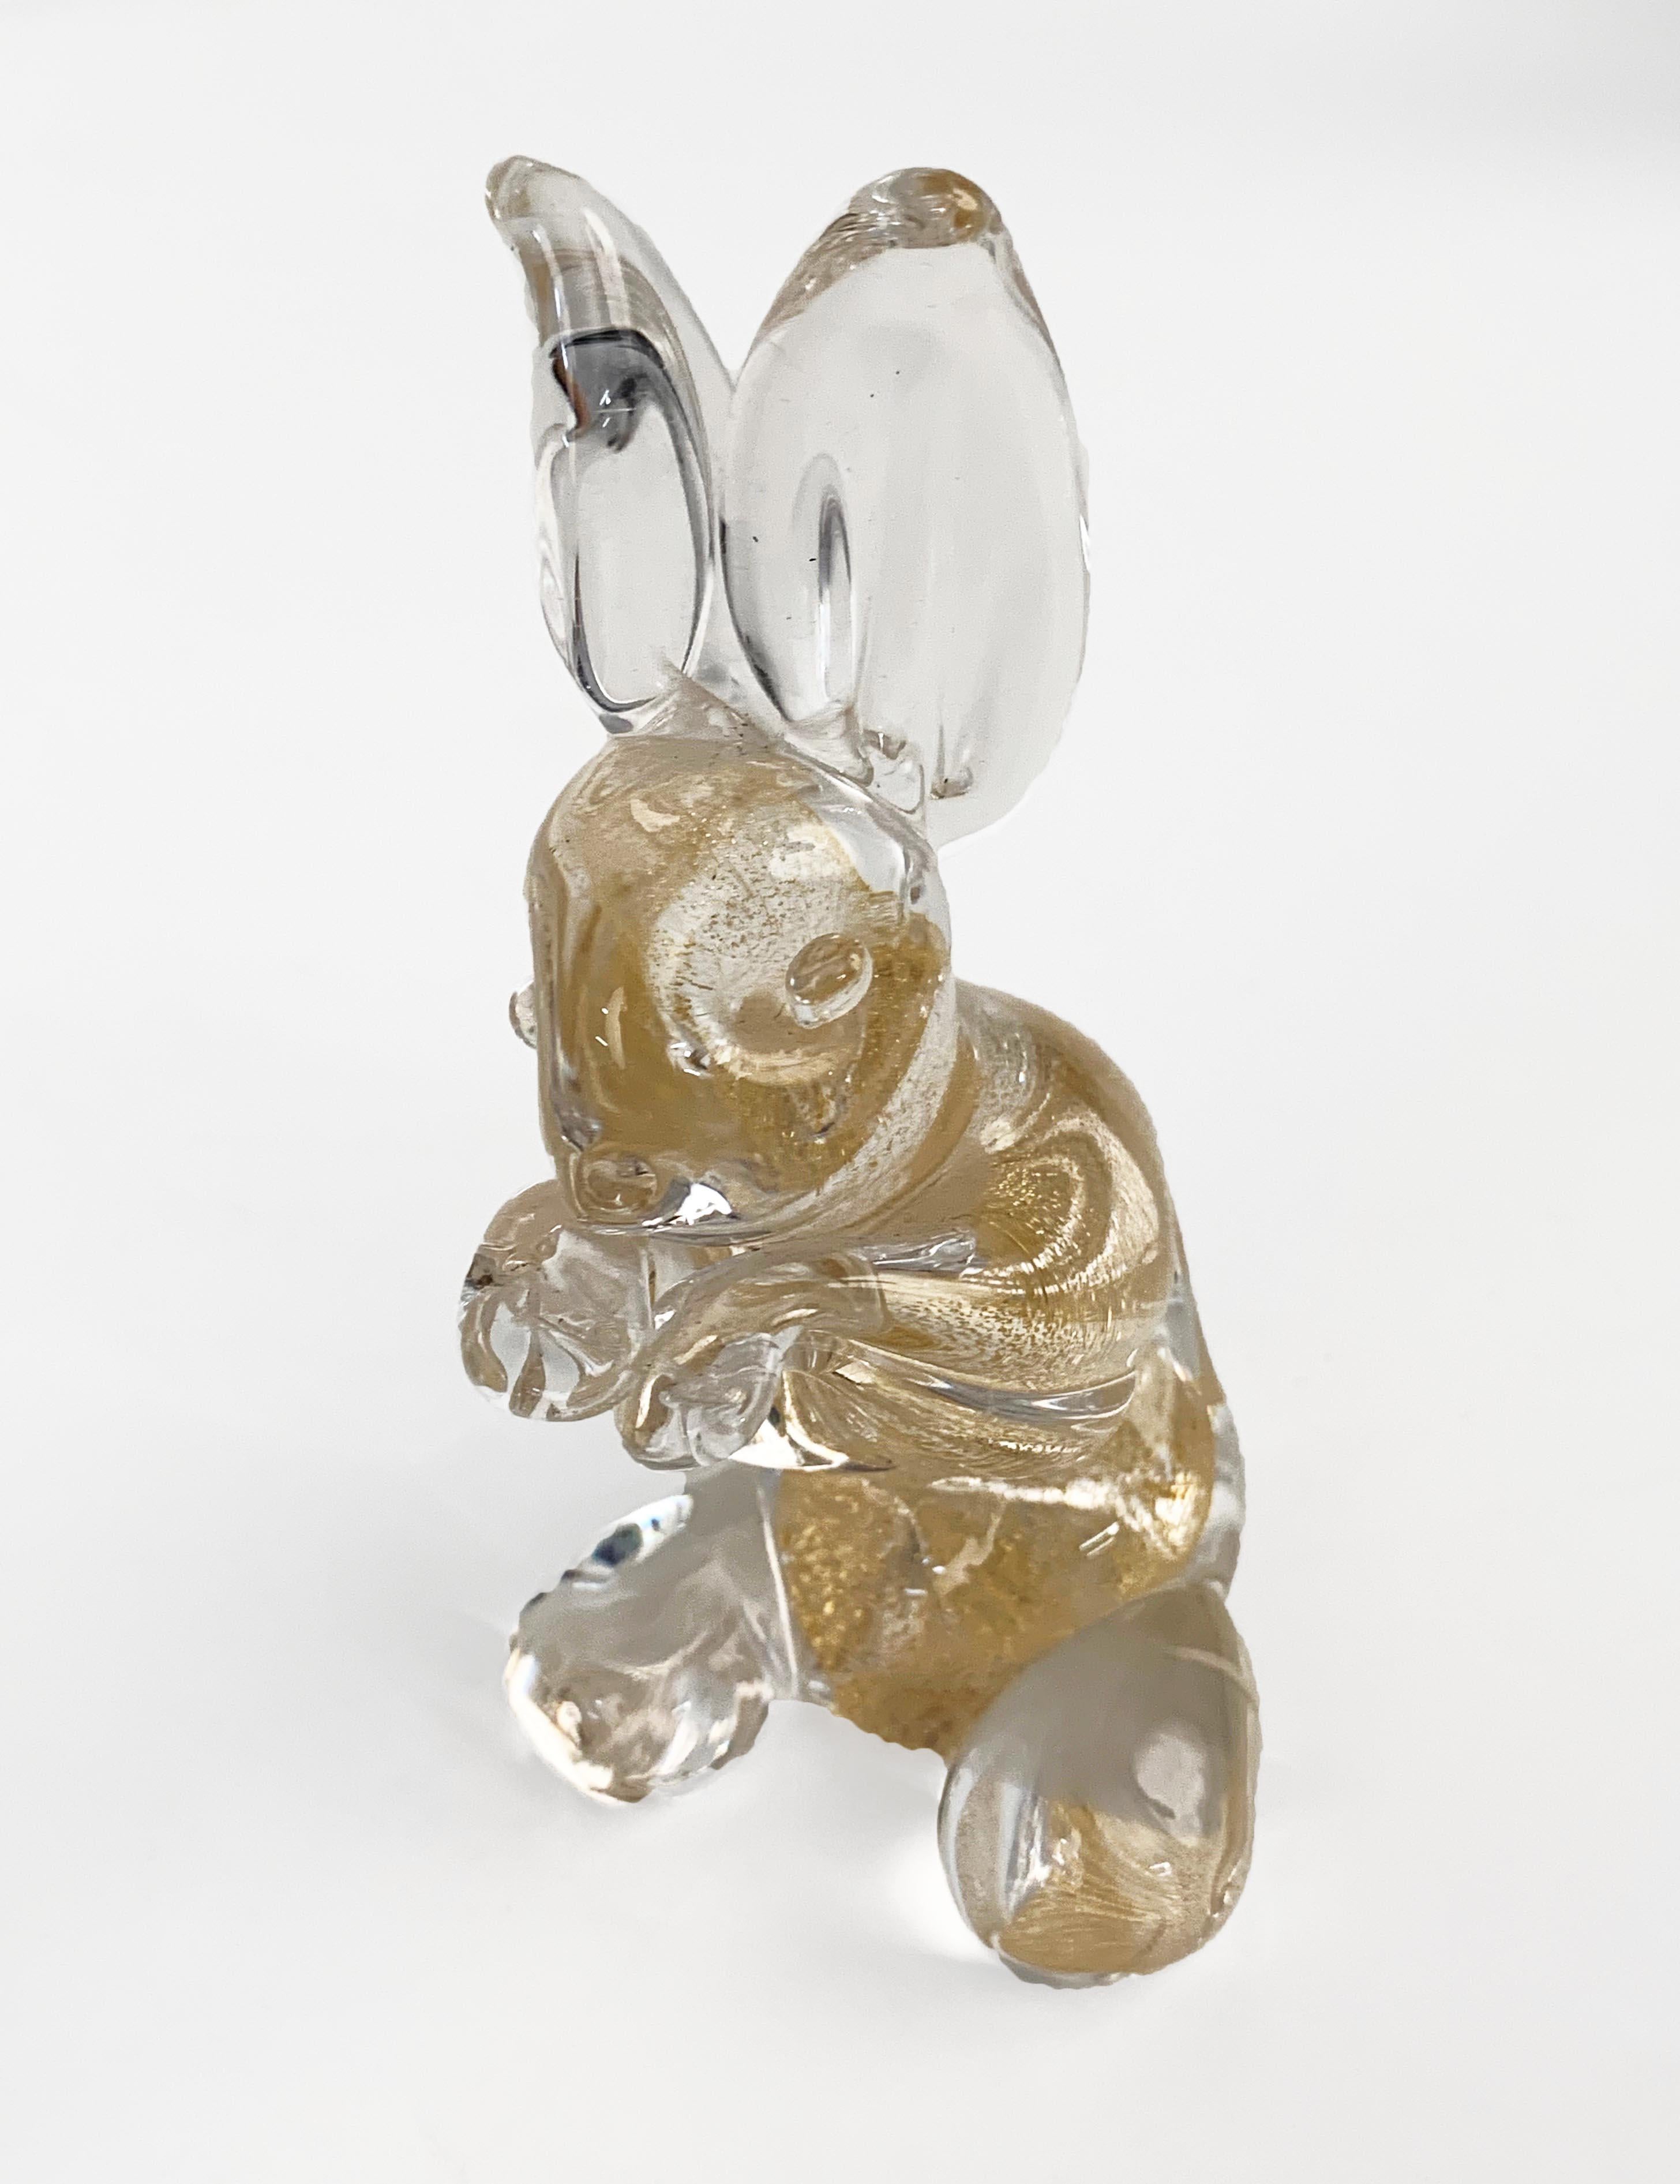 Beautiful midcentury hand blown artistic Murano glass rabbit sculpture with golden dots. This fantastic object was designed by Archimede Seguso and produced in Italy in the 1960s. Original label 